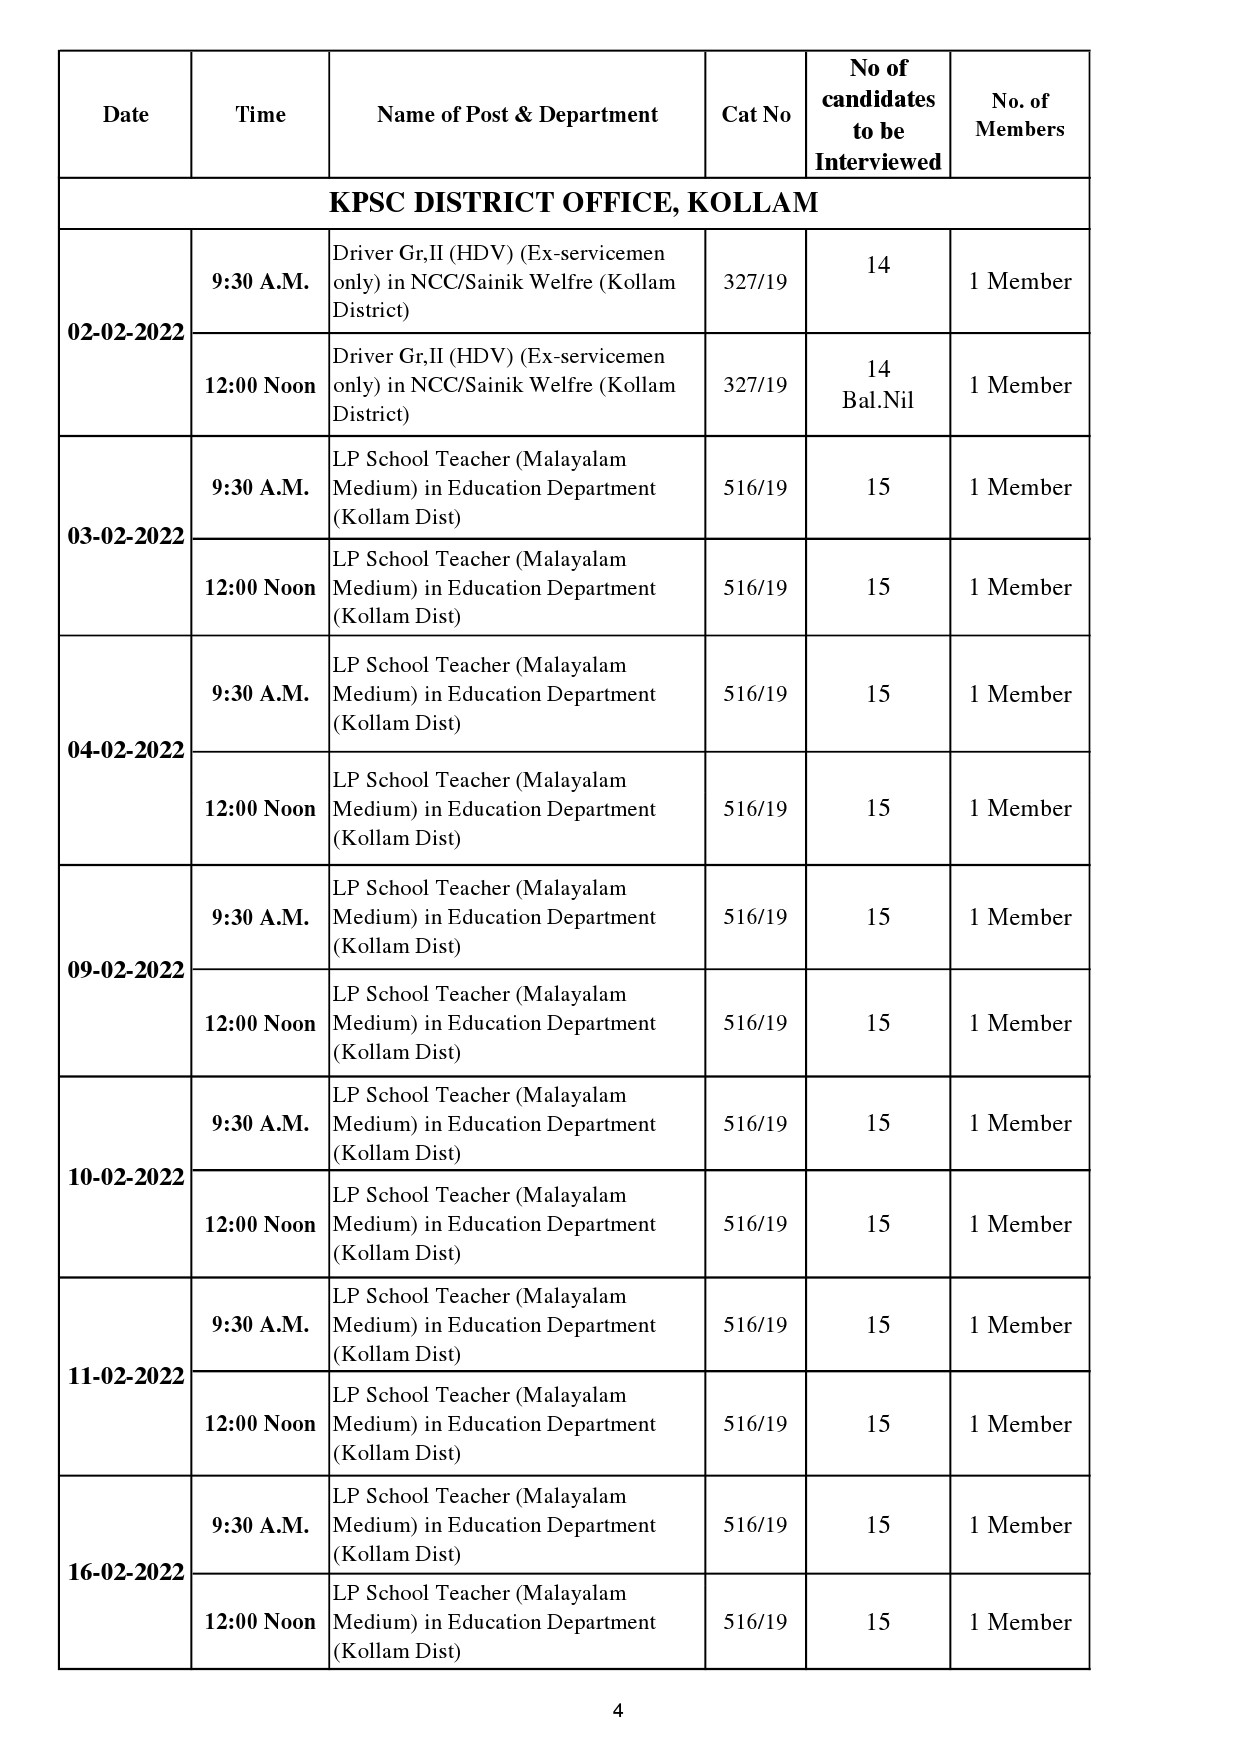 KPSC INTERVIEW PROGRAMME FOR THE MONTH OF FEBRUARY 2022 - Notification Image 4